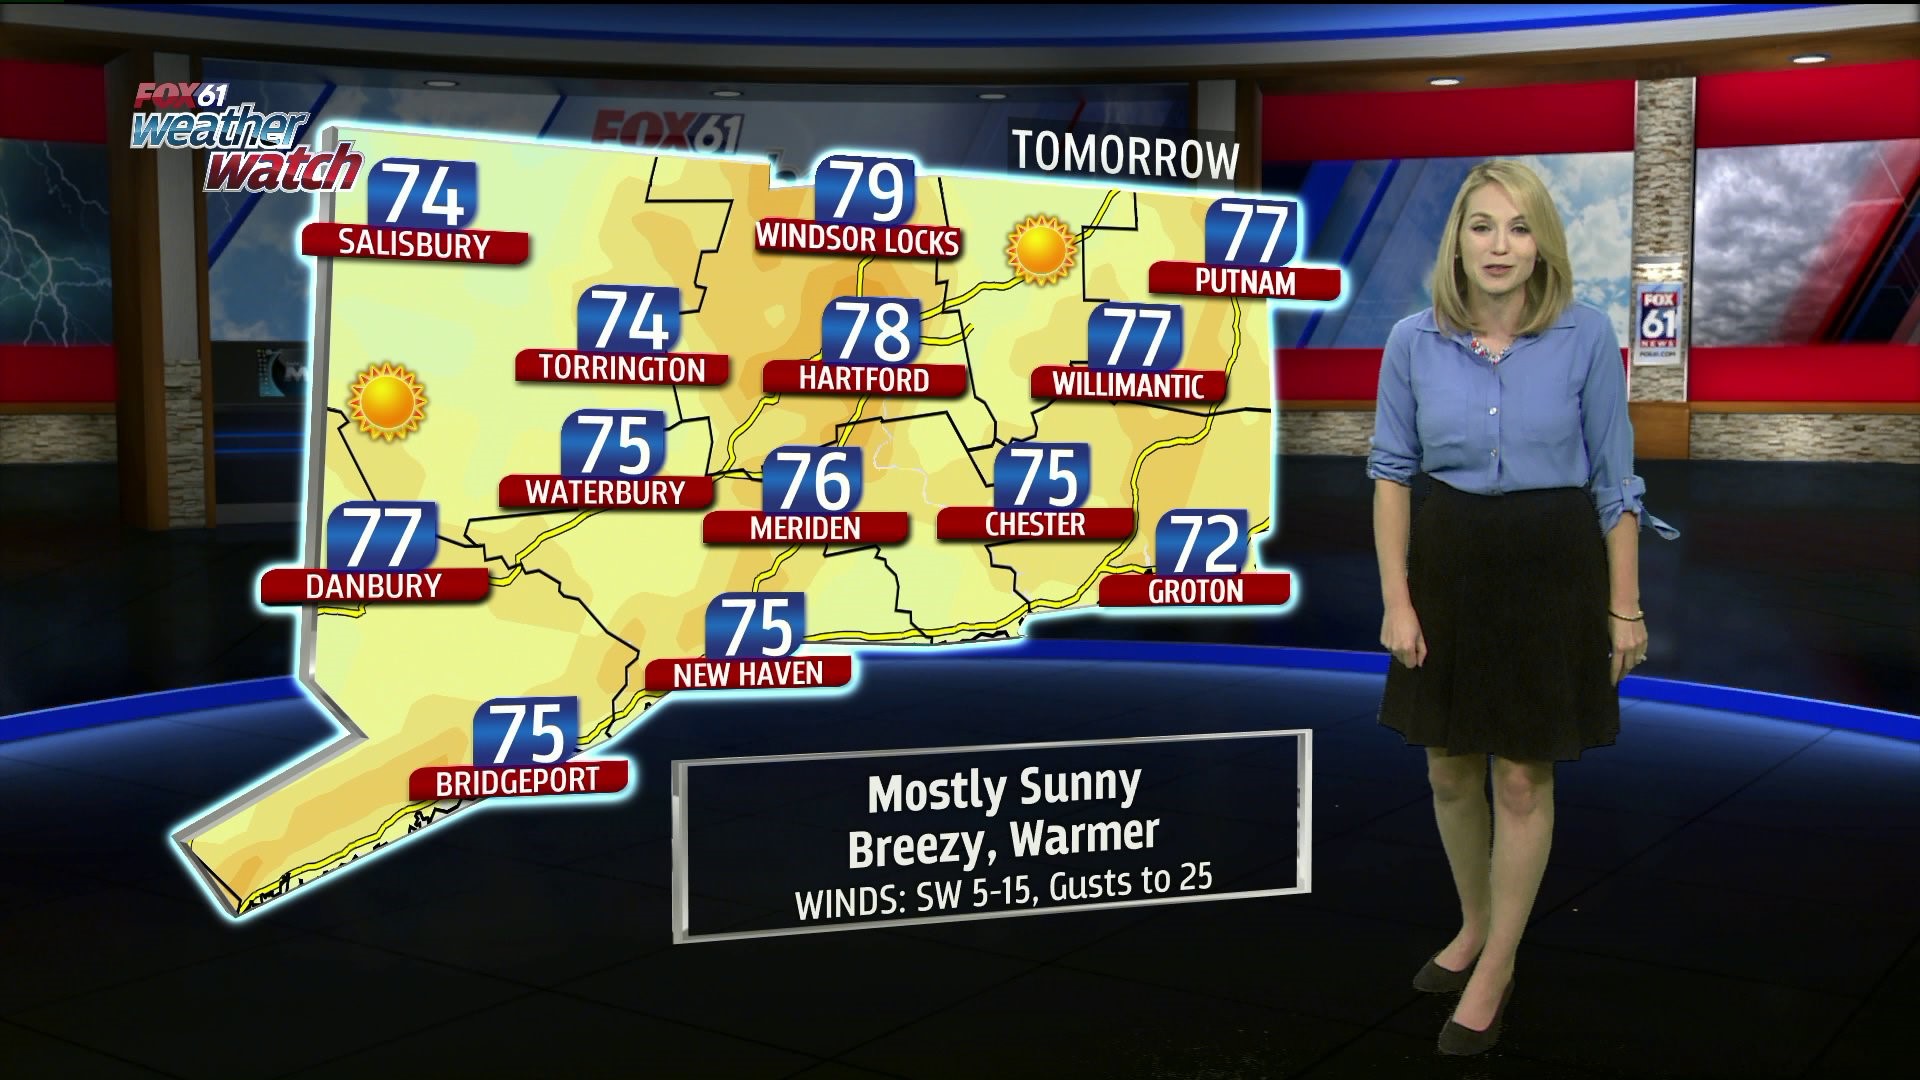 Tuesday evening weather